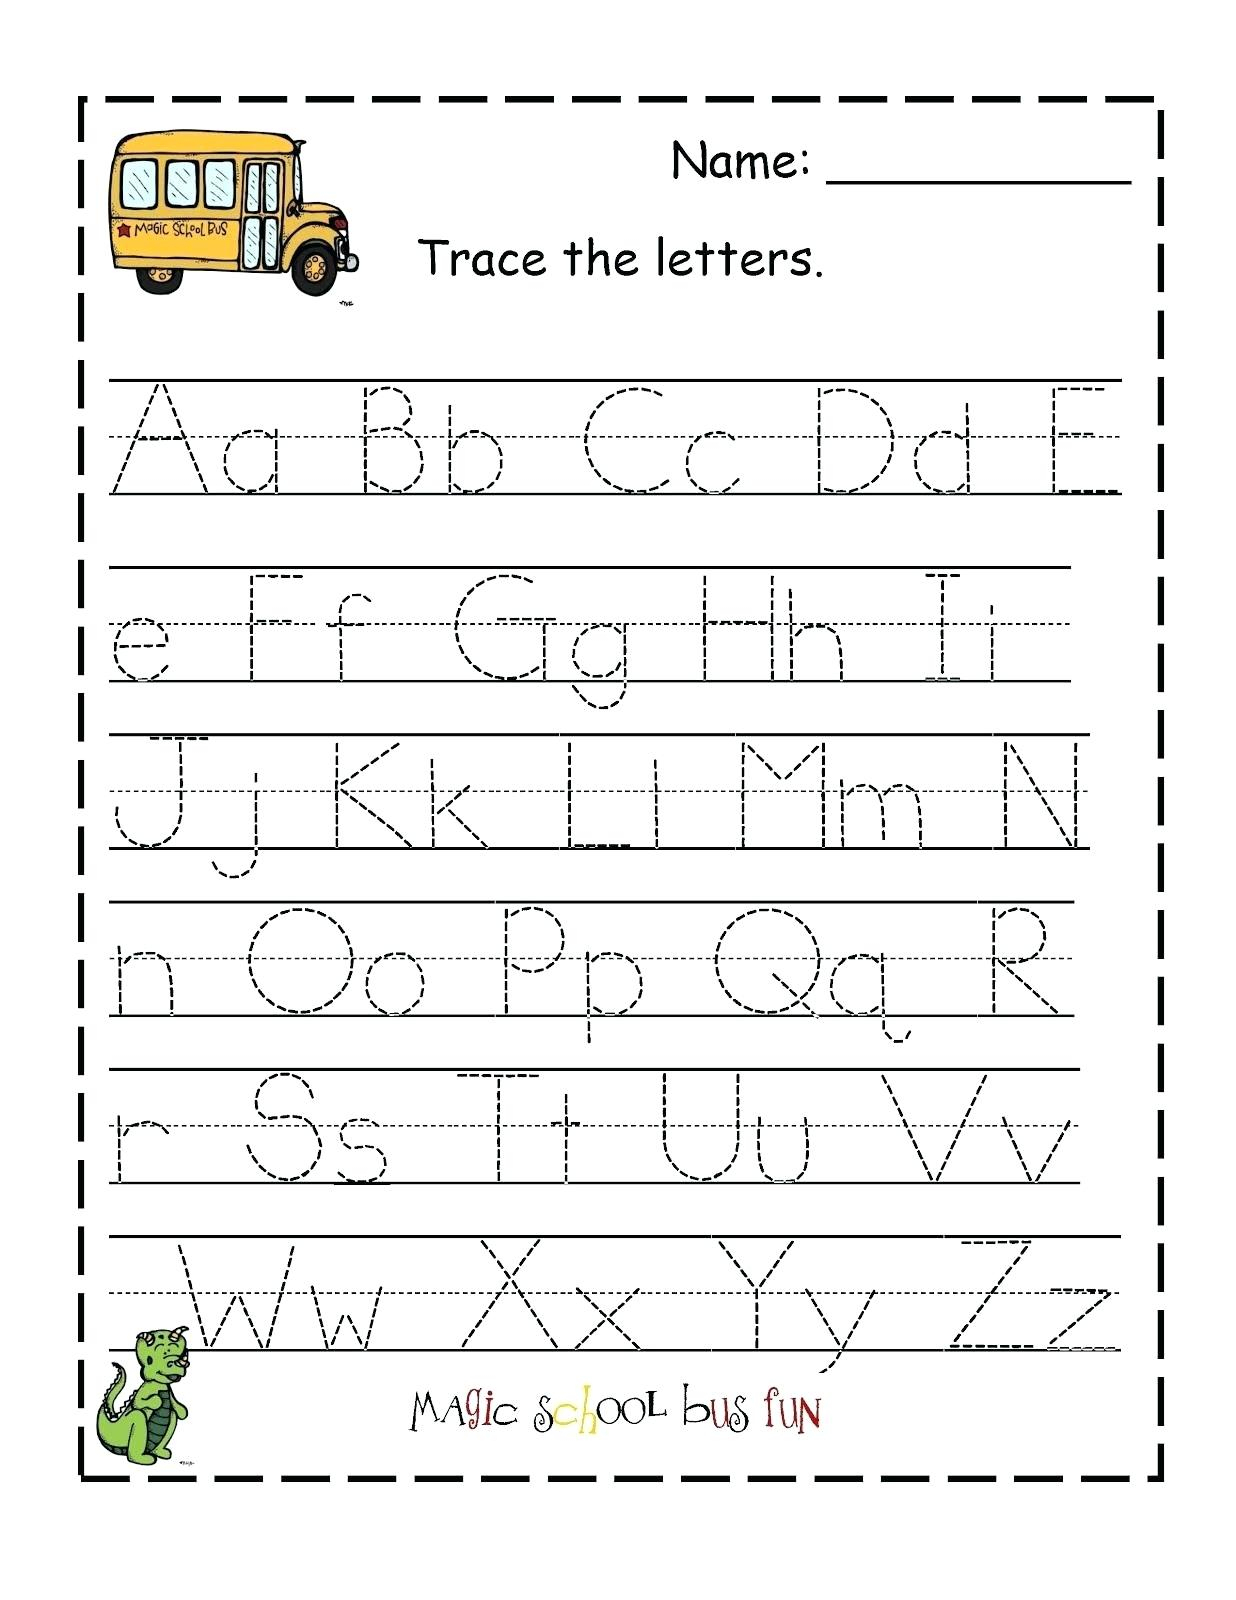 Abc Traceable Tracing Alphabet Kiddo Shelter Abc Traceable Sheets - Free Printable Preschool Worksheets Tracing Letters